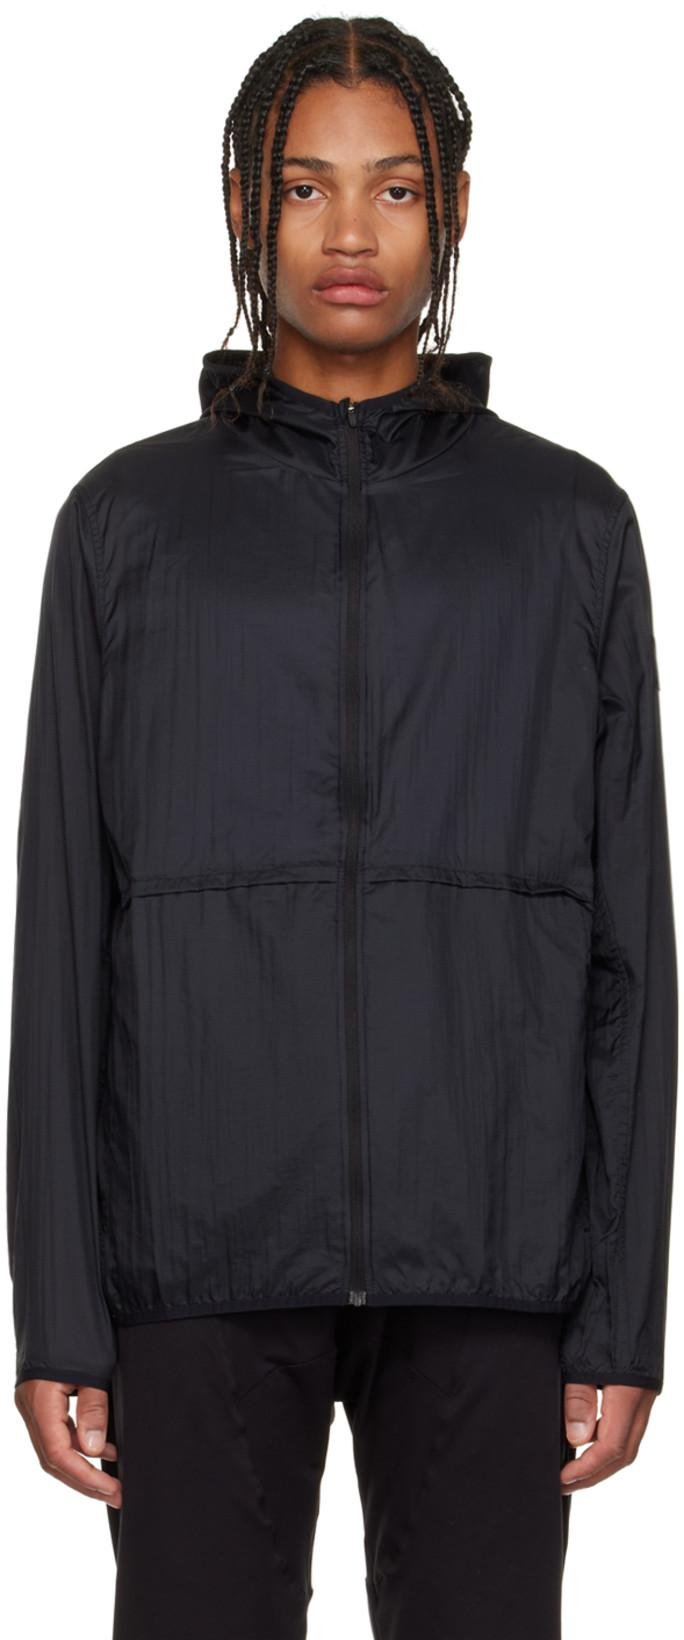 Black Repeat Running Jacket by ALO